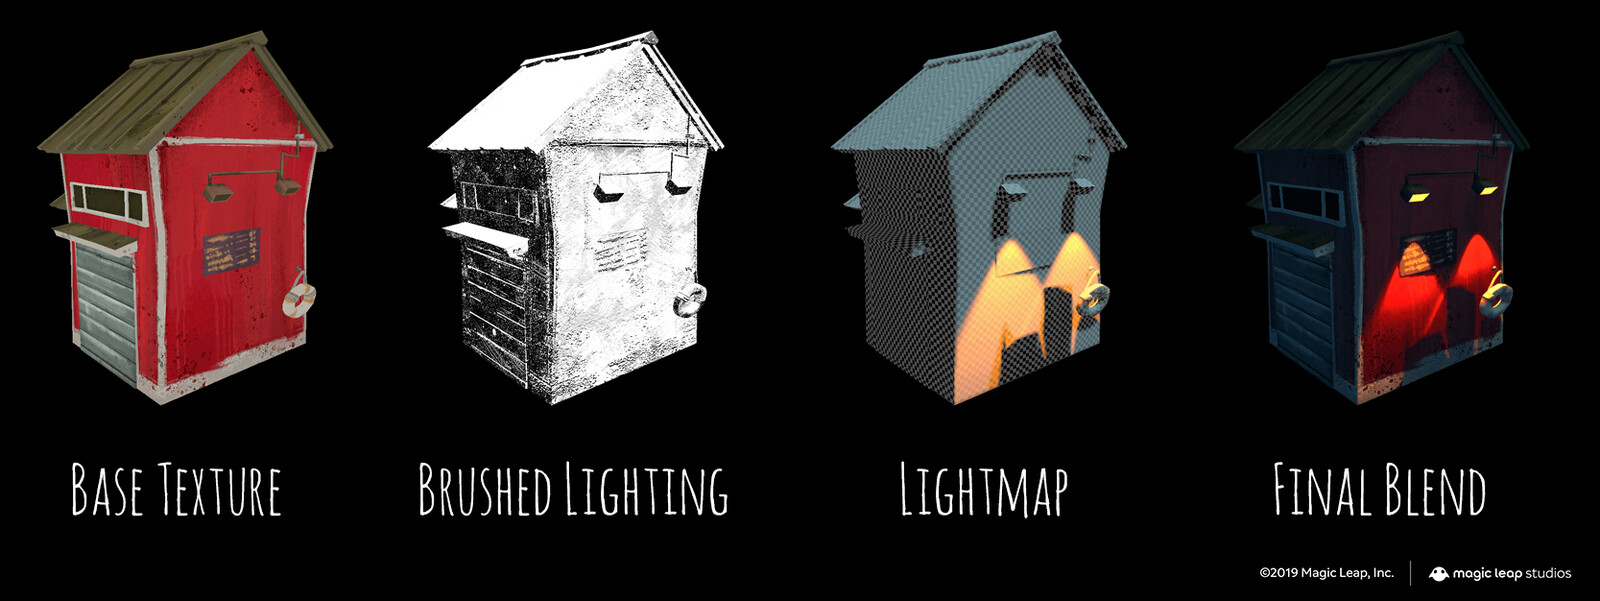 The unbaked visual development was generally composed of these 3 terms: Base Texture, stylized "Brushed Lighting" and the stylized lightmap. If needed, artists had the flexibility to tune the second two terms within each material.